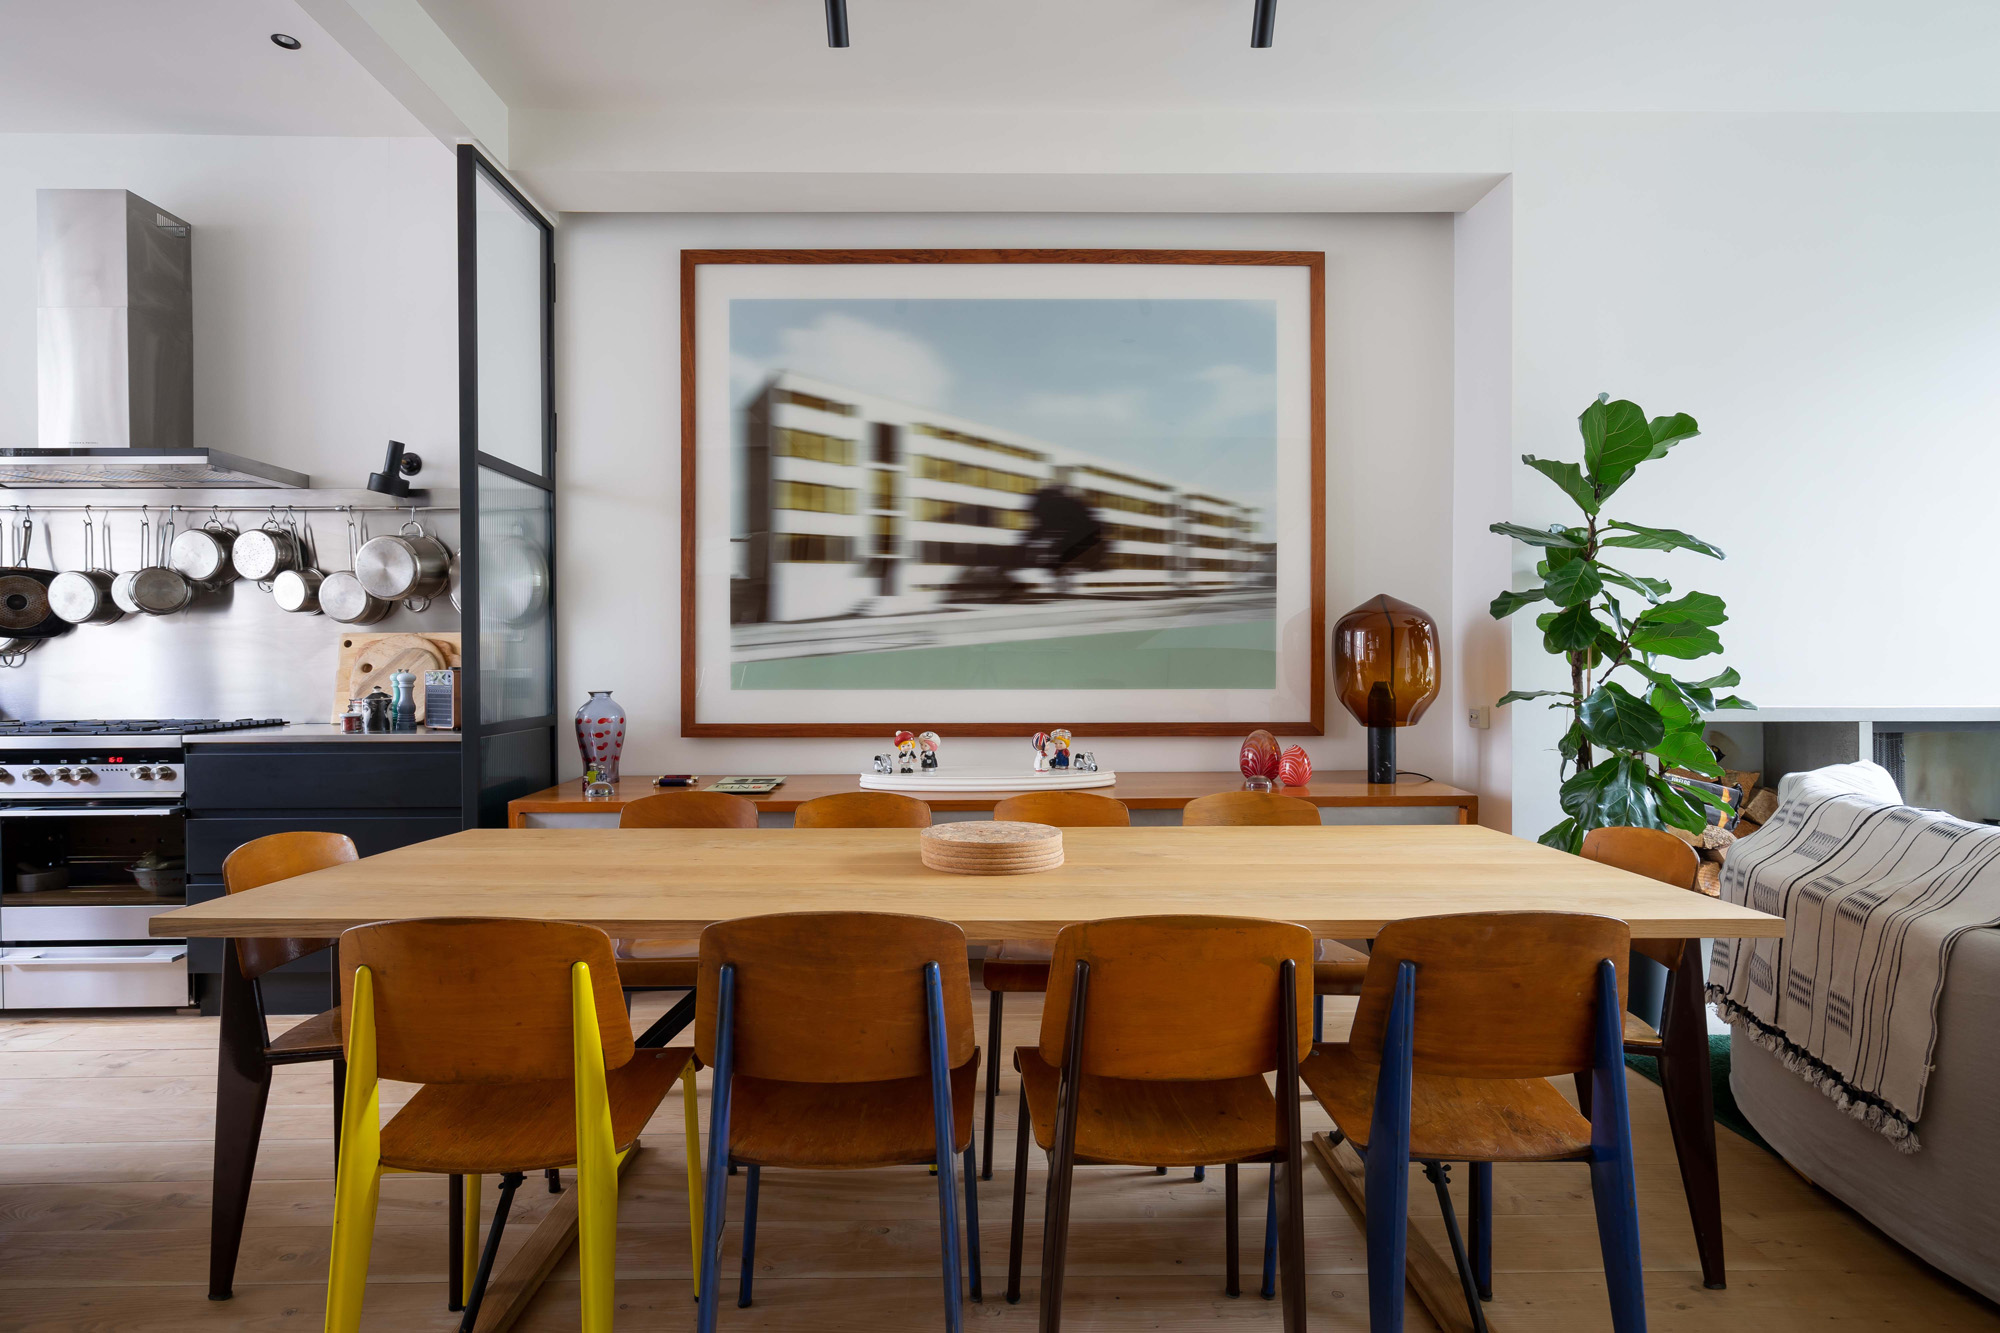 For Rent: Leamington Road Villas Notting Hil W11 contemporary interior design with wooden dining table